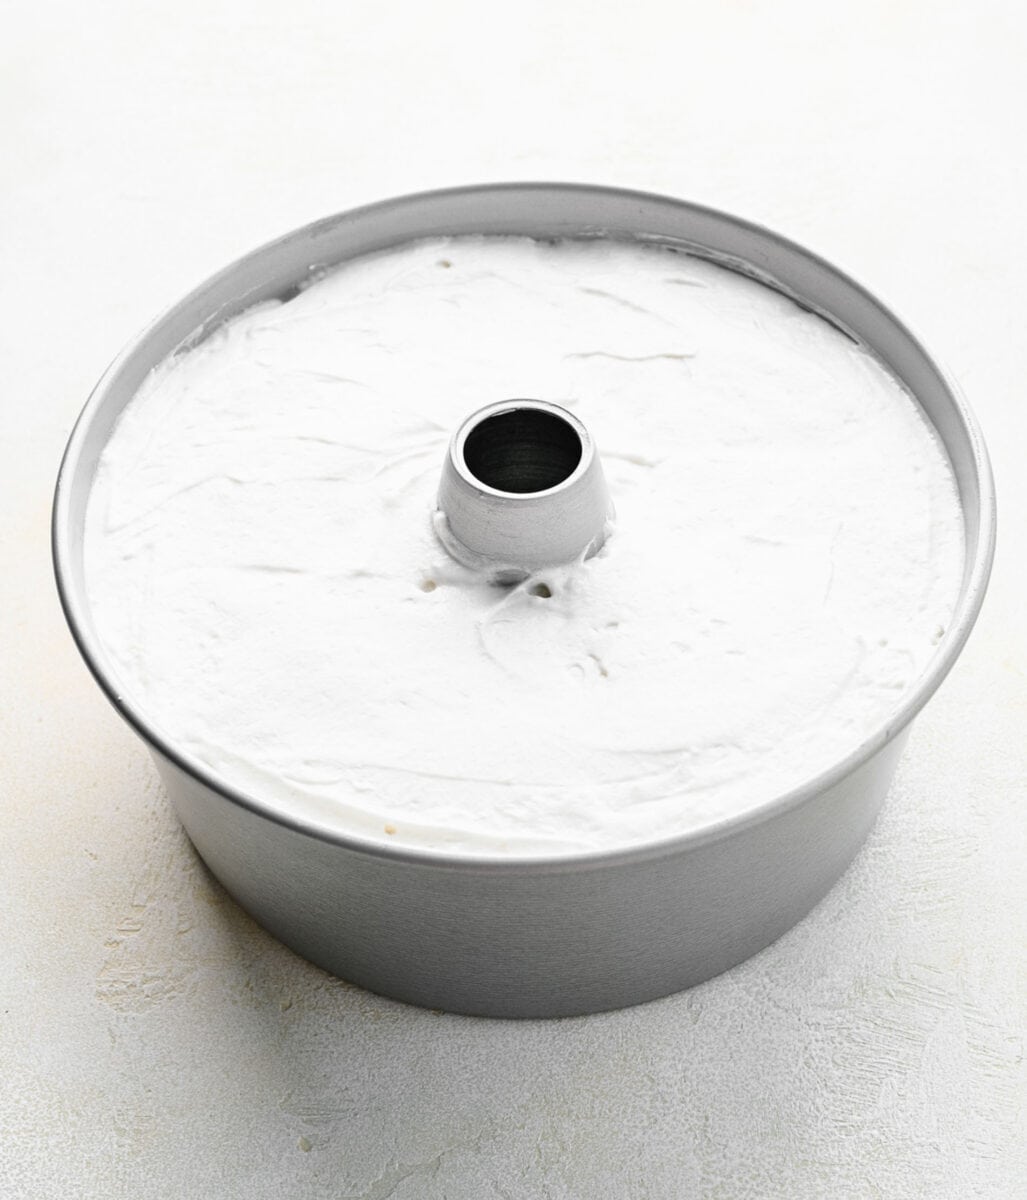 Angel food cake batter smoothed into an angel food cake pan.